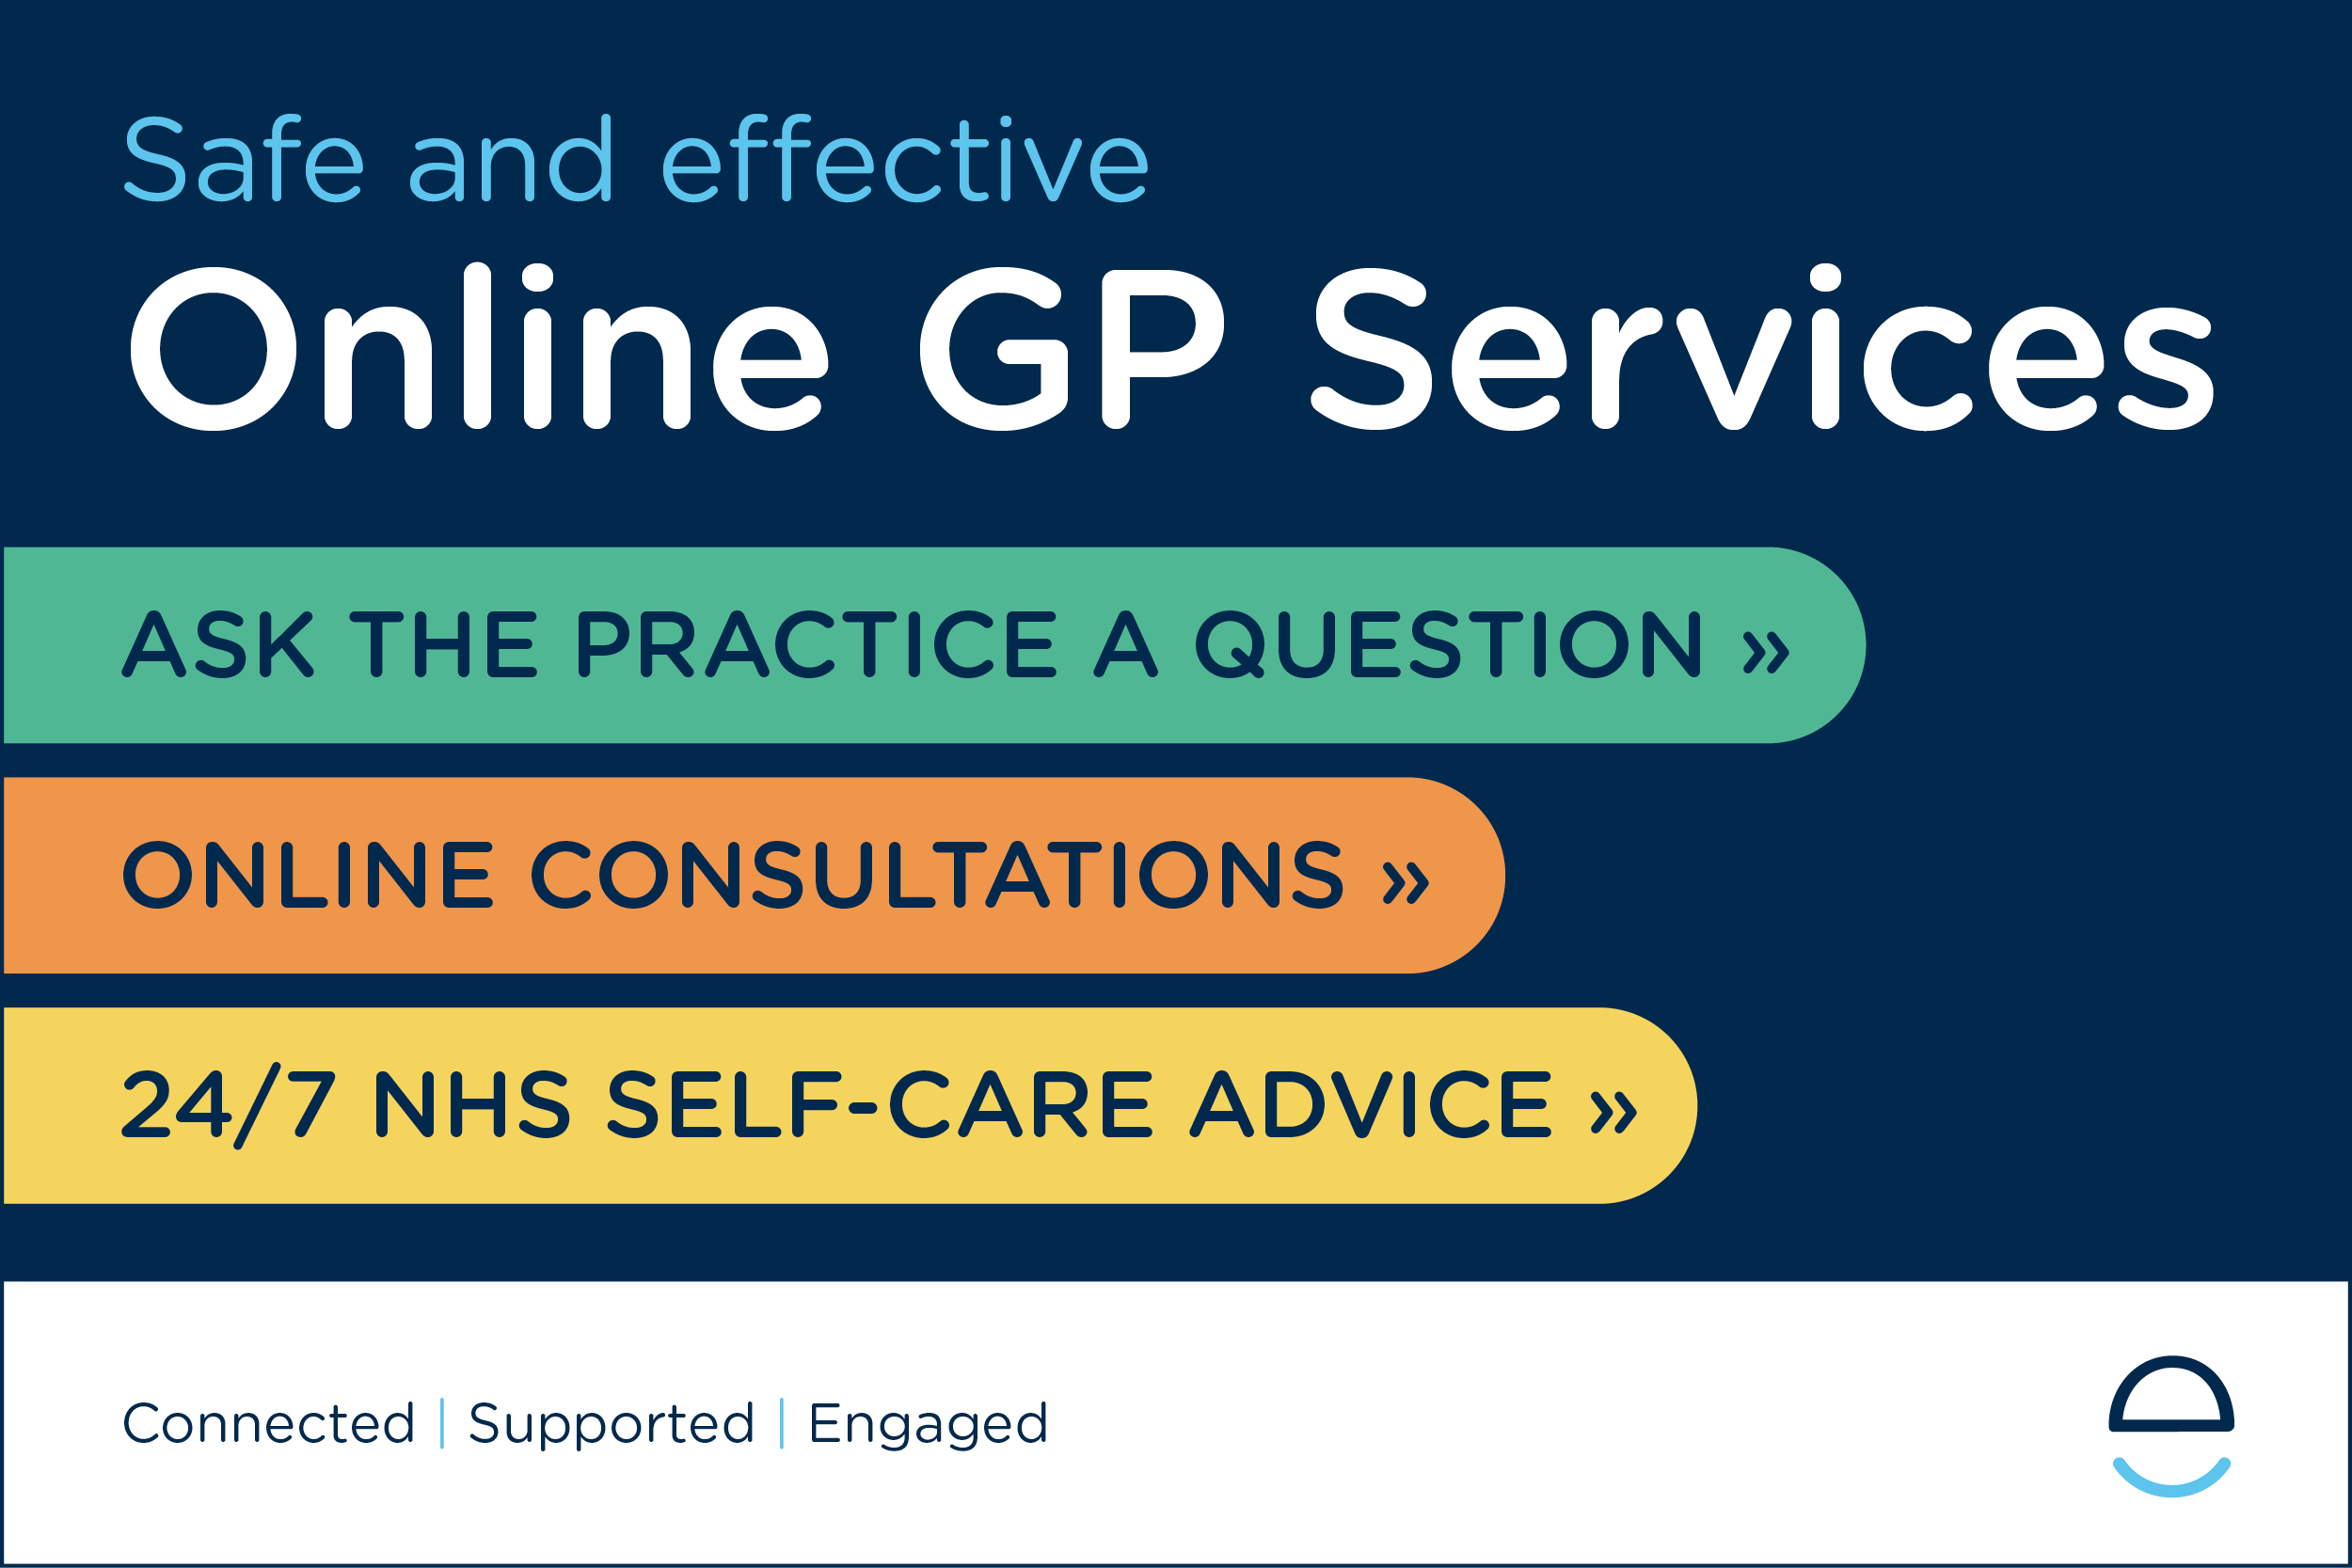  Contact us online for help with a non-urgent medical or admin request